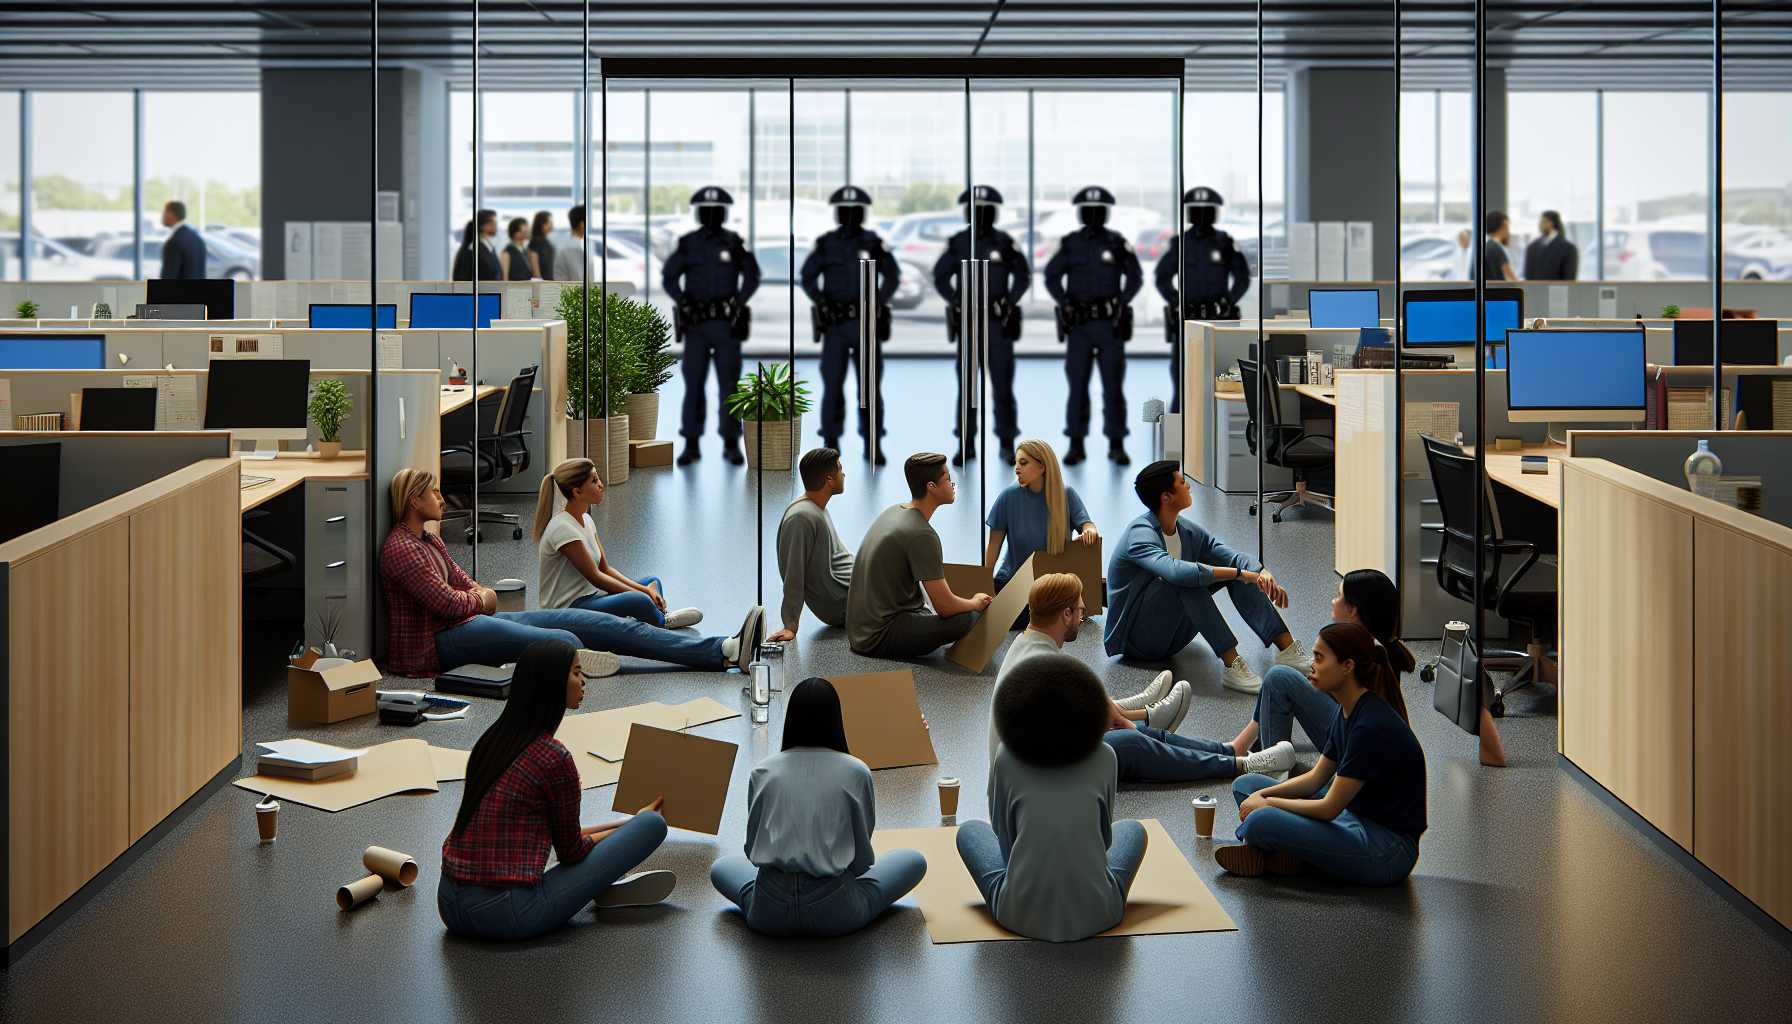 Google employees holding a sit-in protest in a modern tech company office environment with police arriving